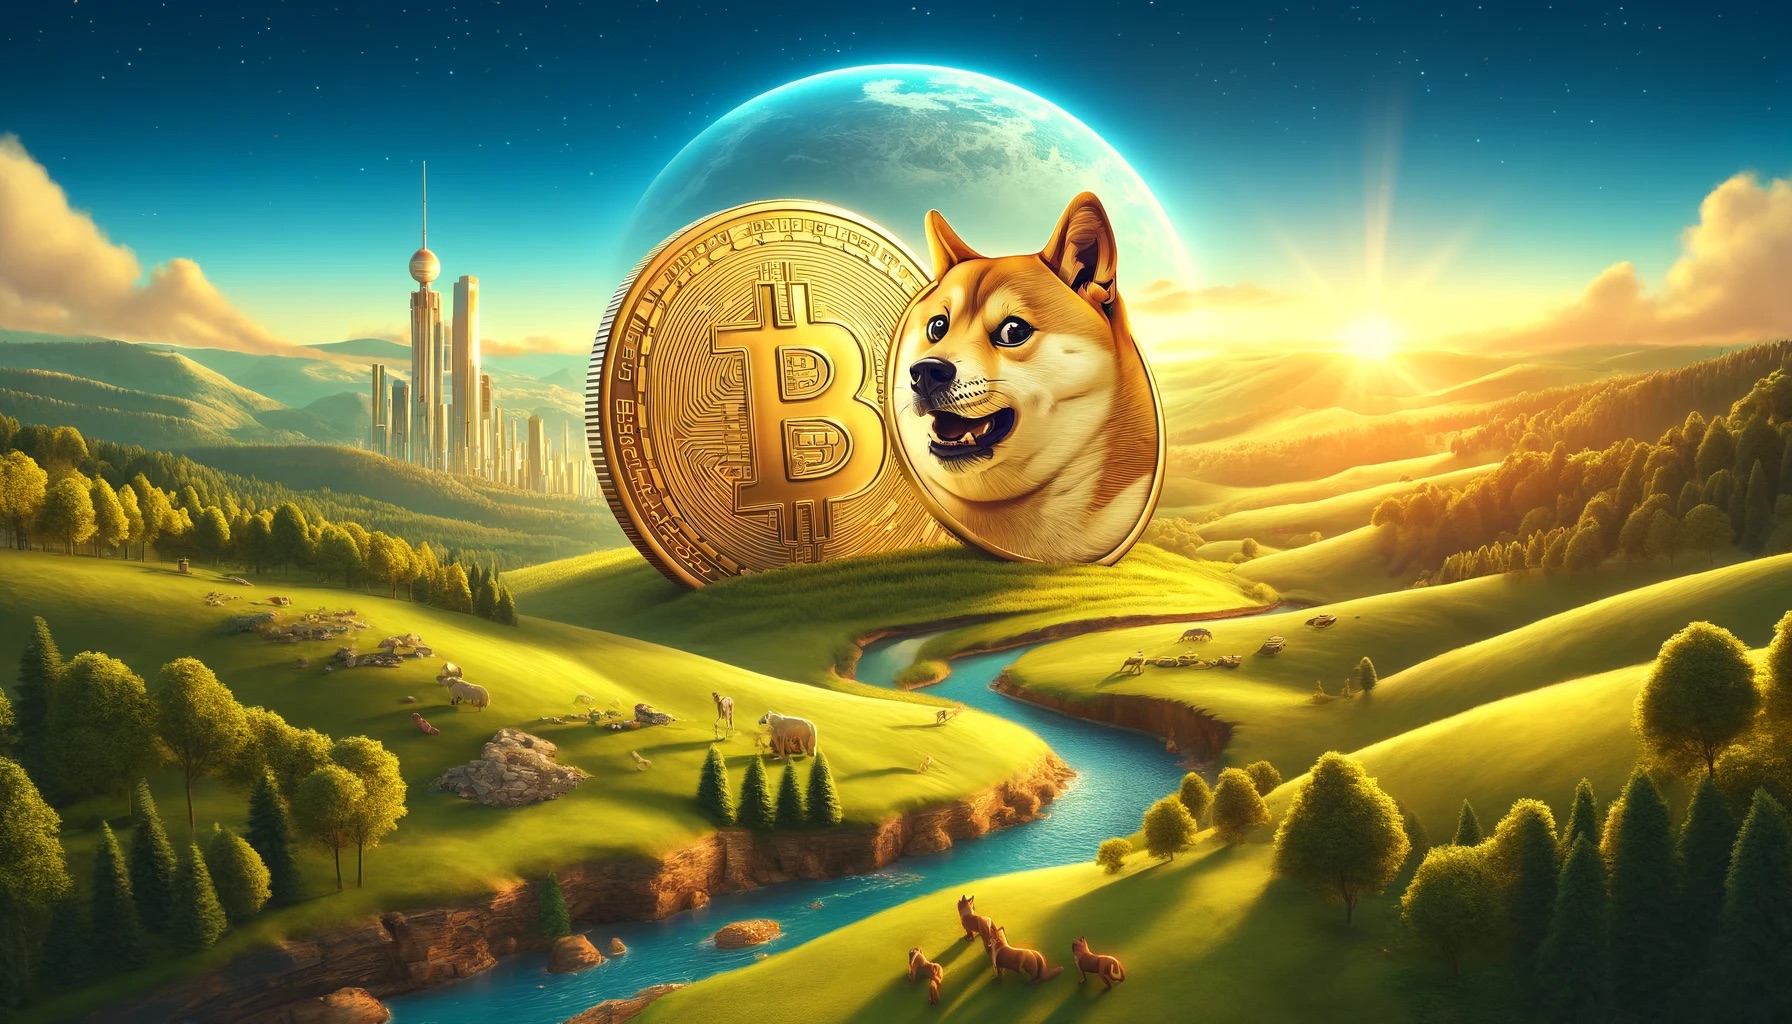 Popular Analyst Predicts Dogecoin Will Outperform Bitcoin As Market Enters Meme Coin Super Cycle